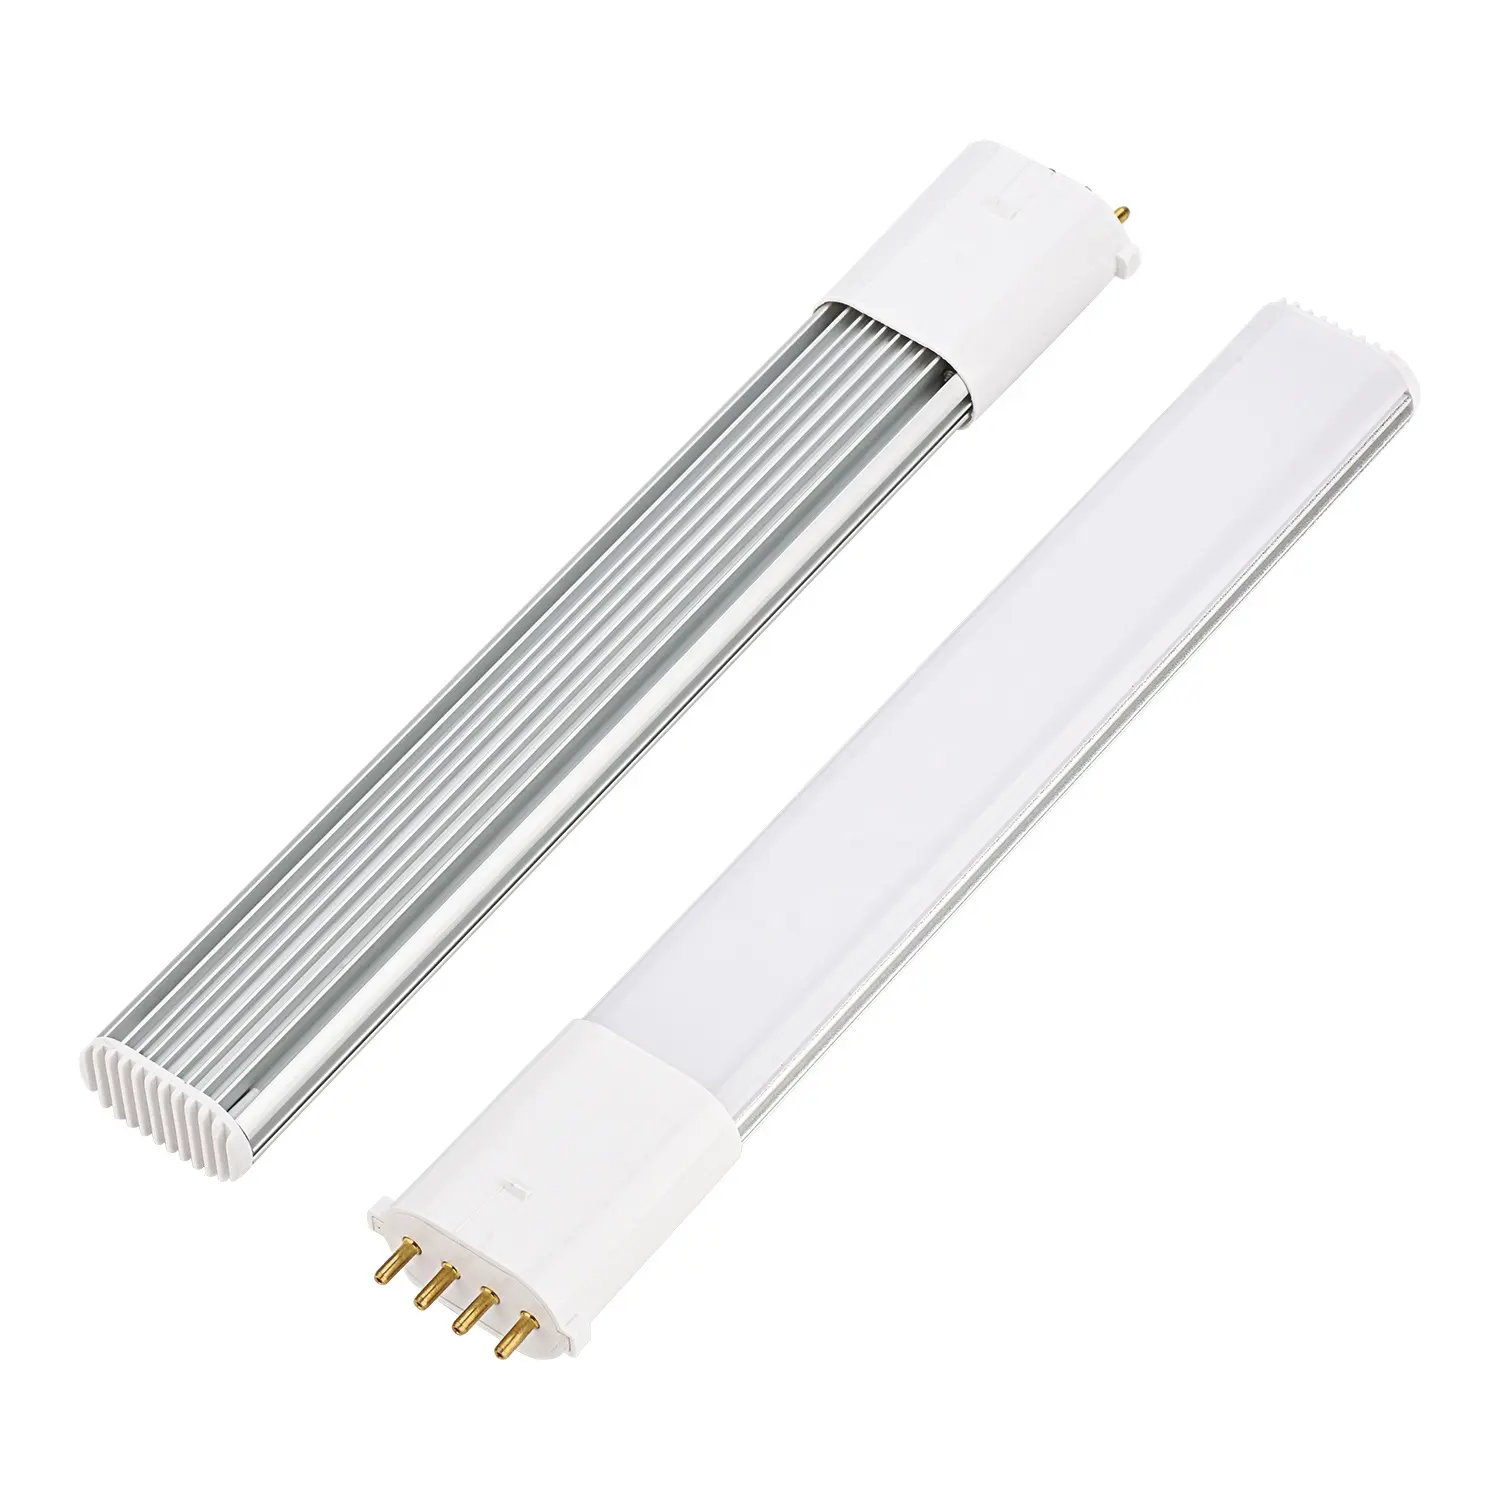 LED 2g7 8w lamp replacement 45W fluorescent tube home lighting LED 2G7 bulb